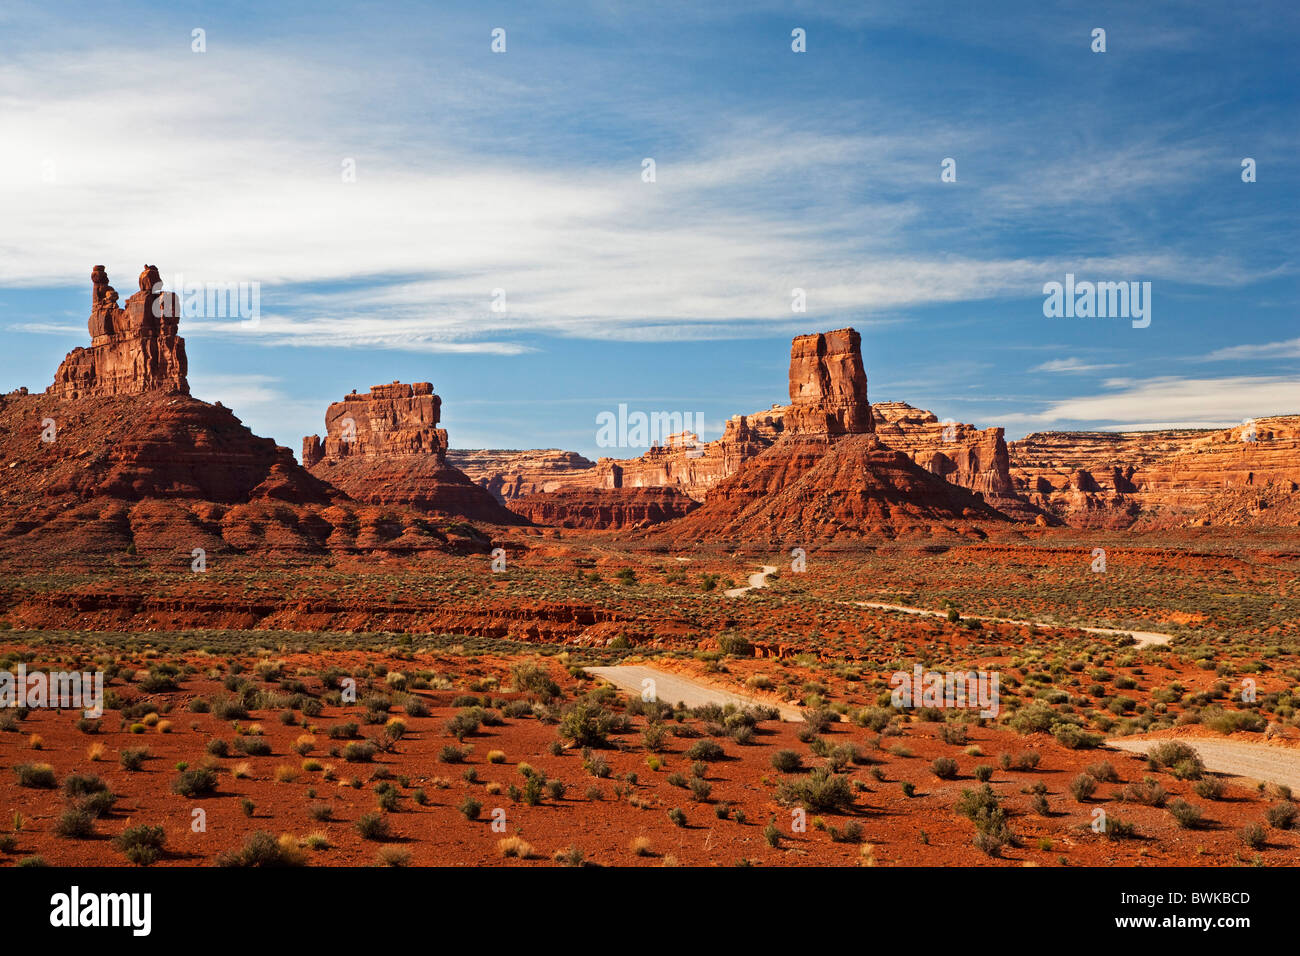 Rock formations in the Valley of Gods, Utah, USA Stock Photo